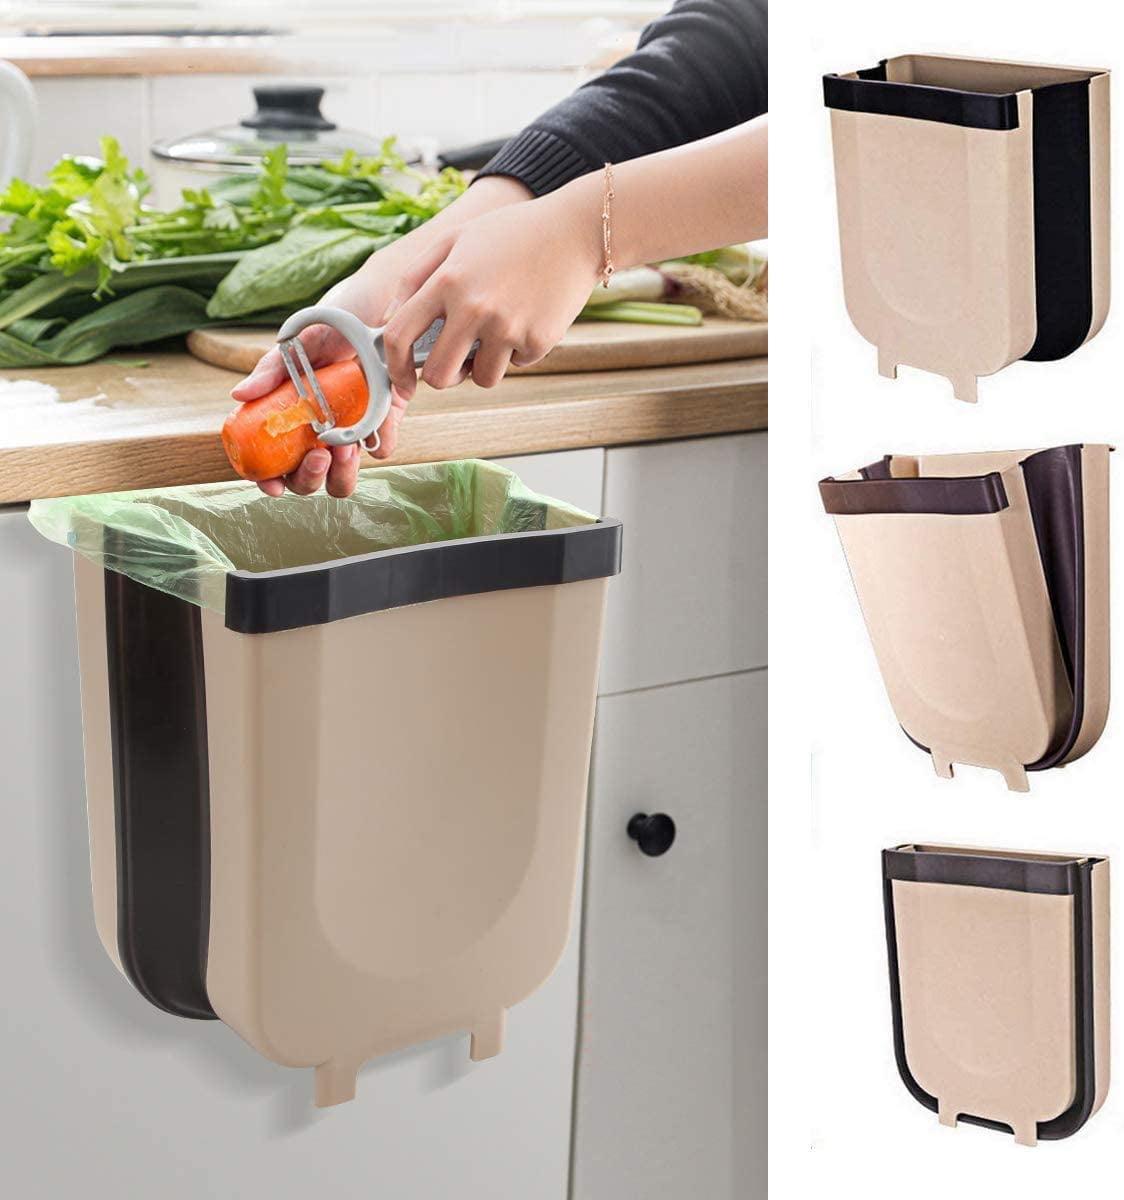 9L/2.3 Gallon Collapsible Trash Bin Small Compact Garbage Can Attached to Cabinet Door Kitchen Drawer Bedroom Dorm Room Car Waste Bin Kitchen Hanging Trash Can